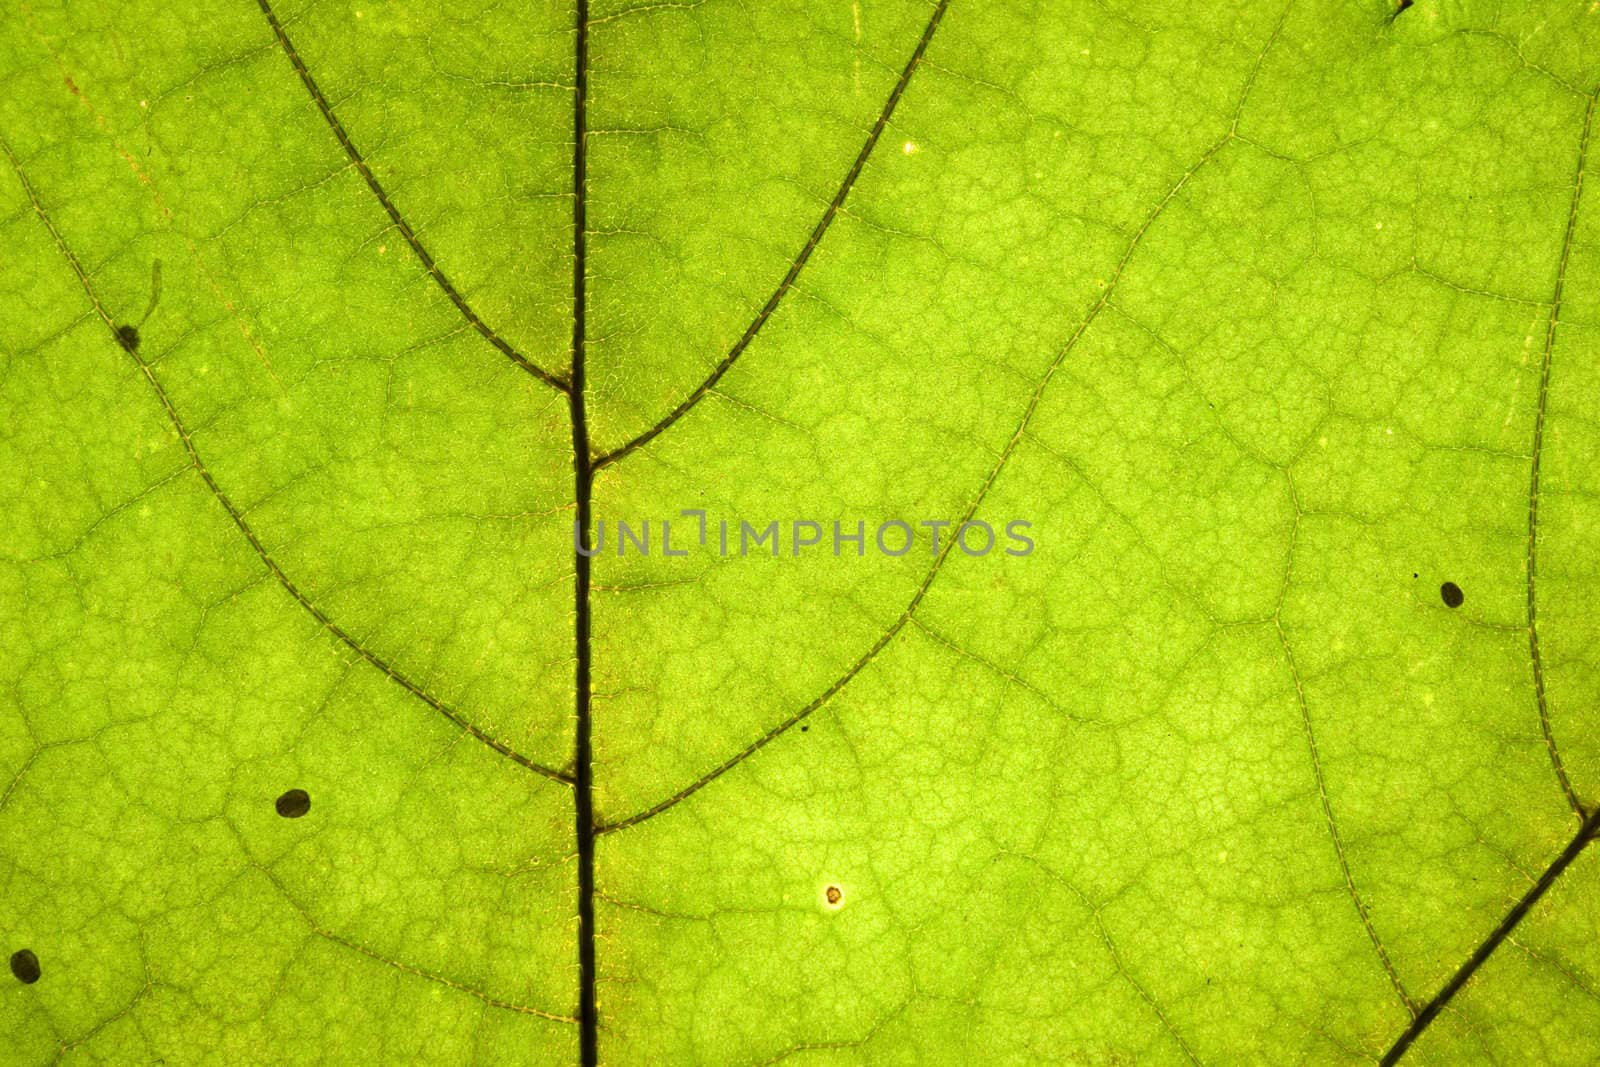 green dry leaf detail texture 